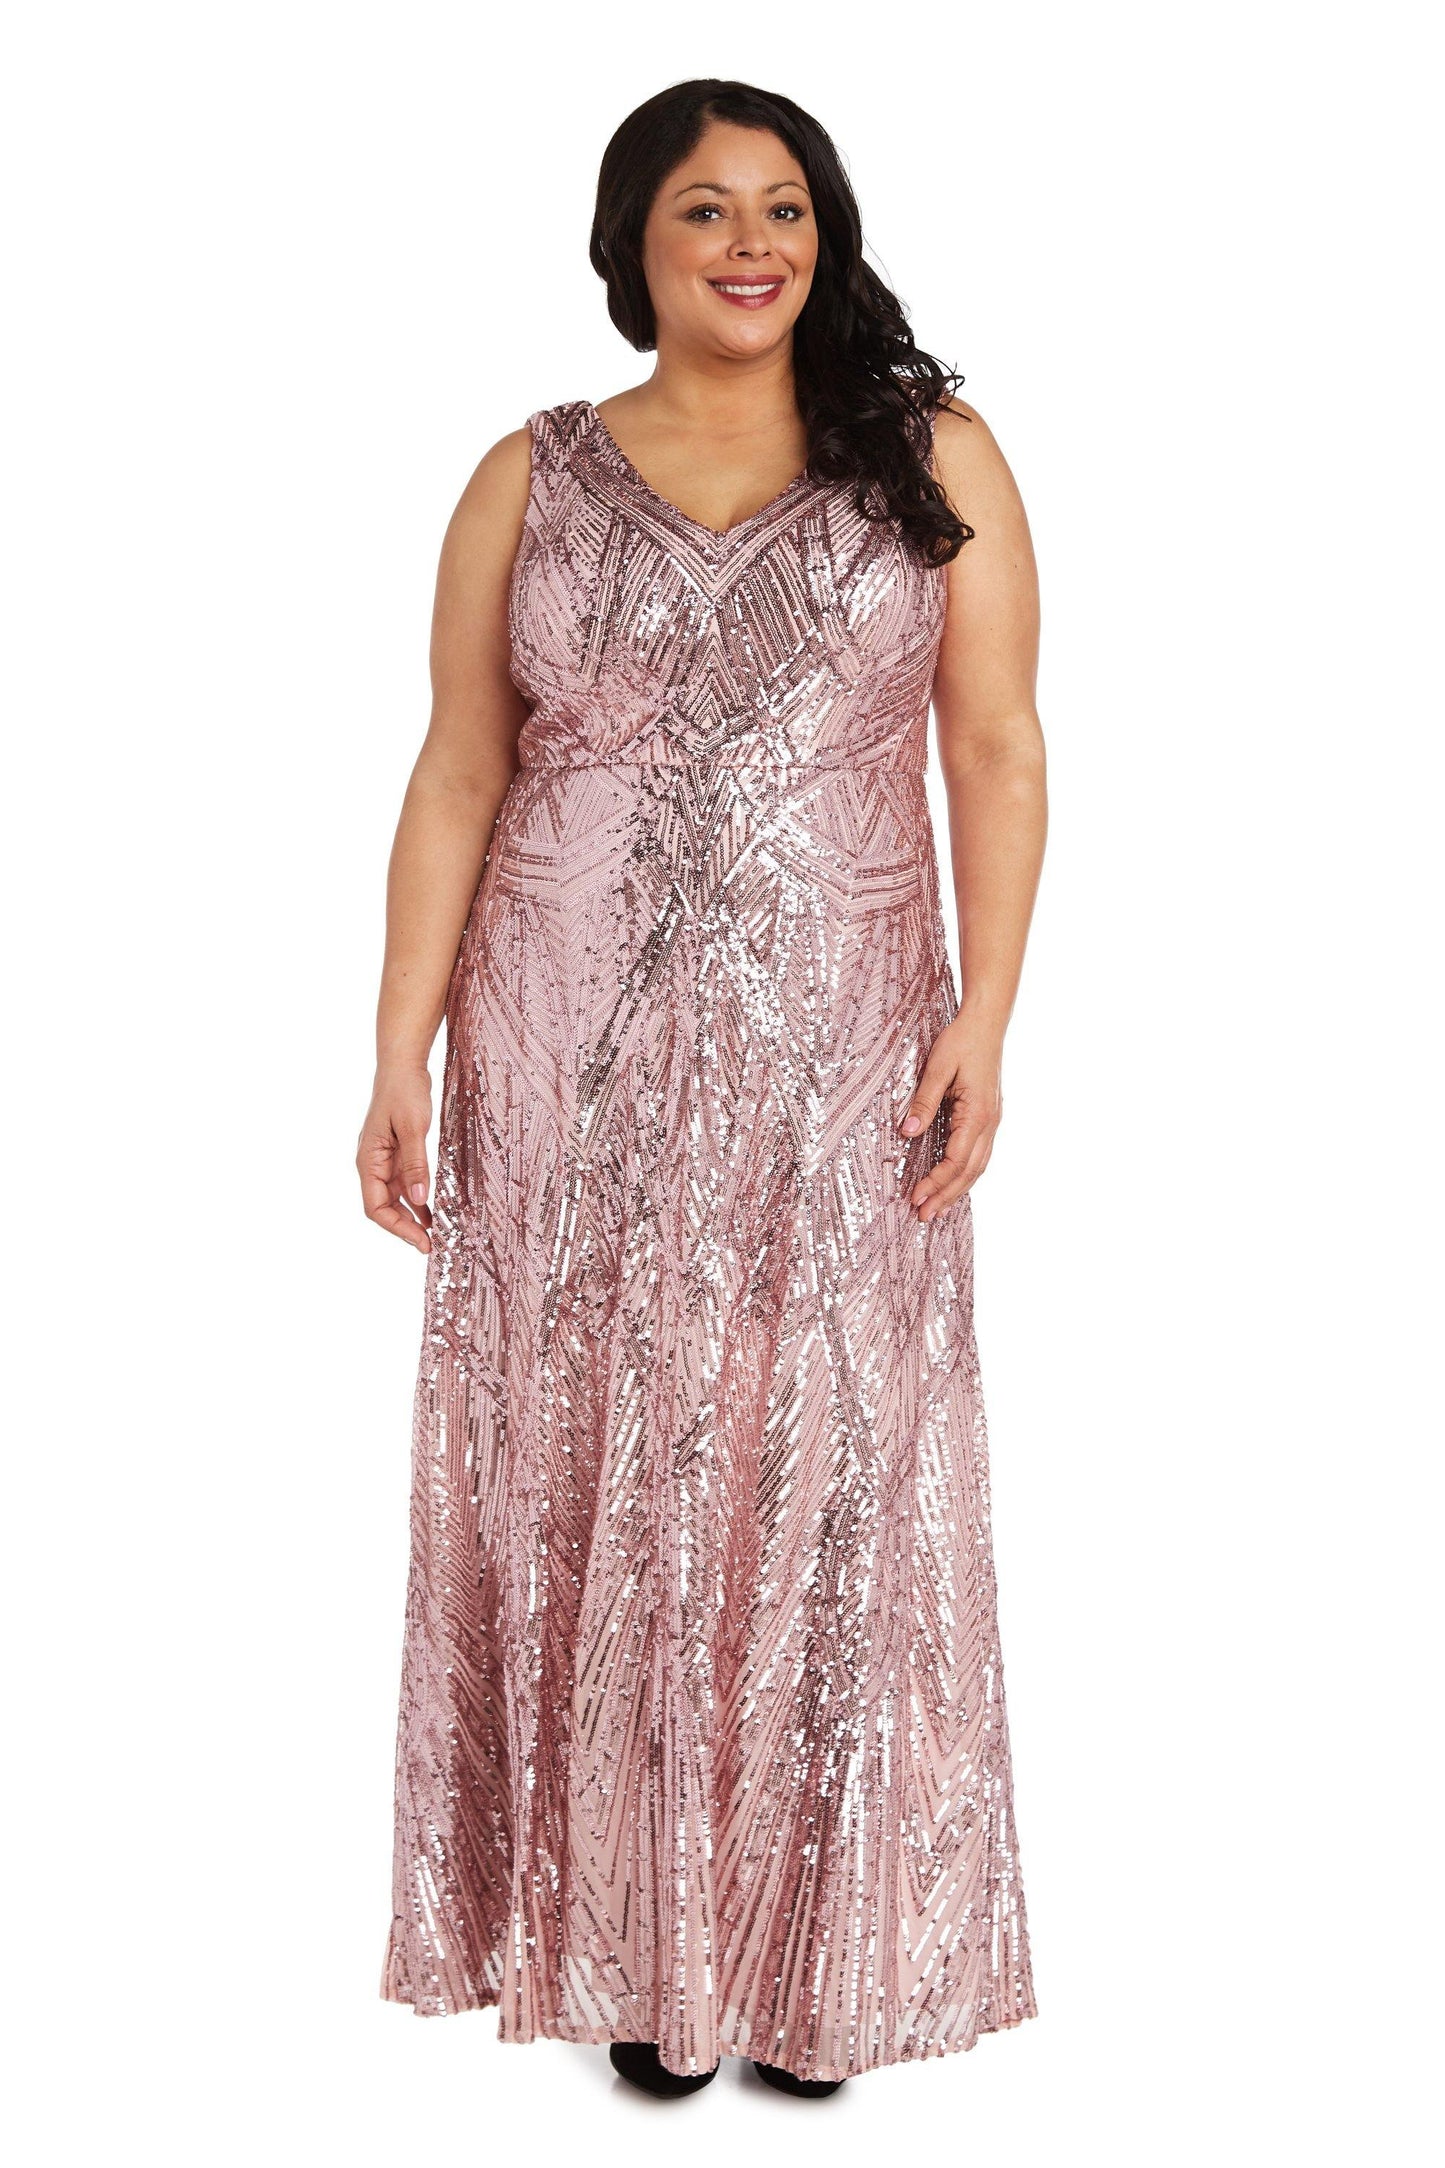 Long Plus Size Sleeveless Dress Sale - The Dress Outlet